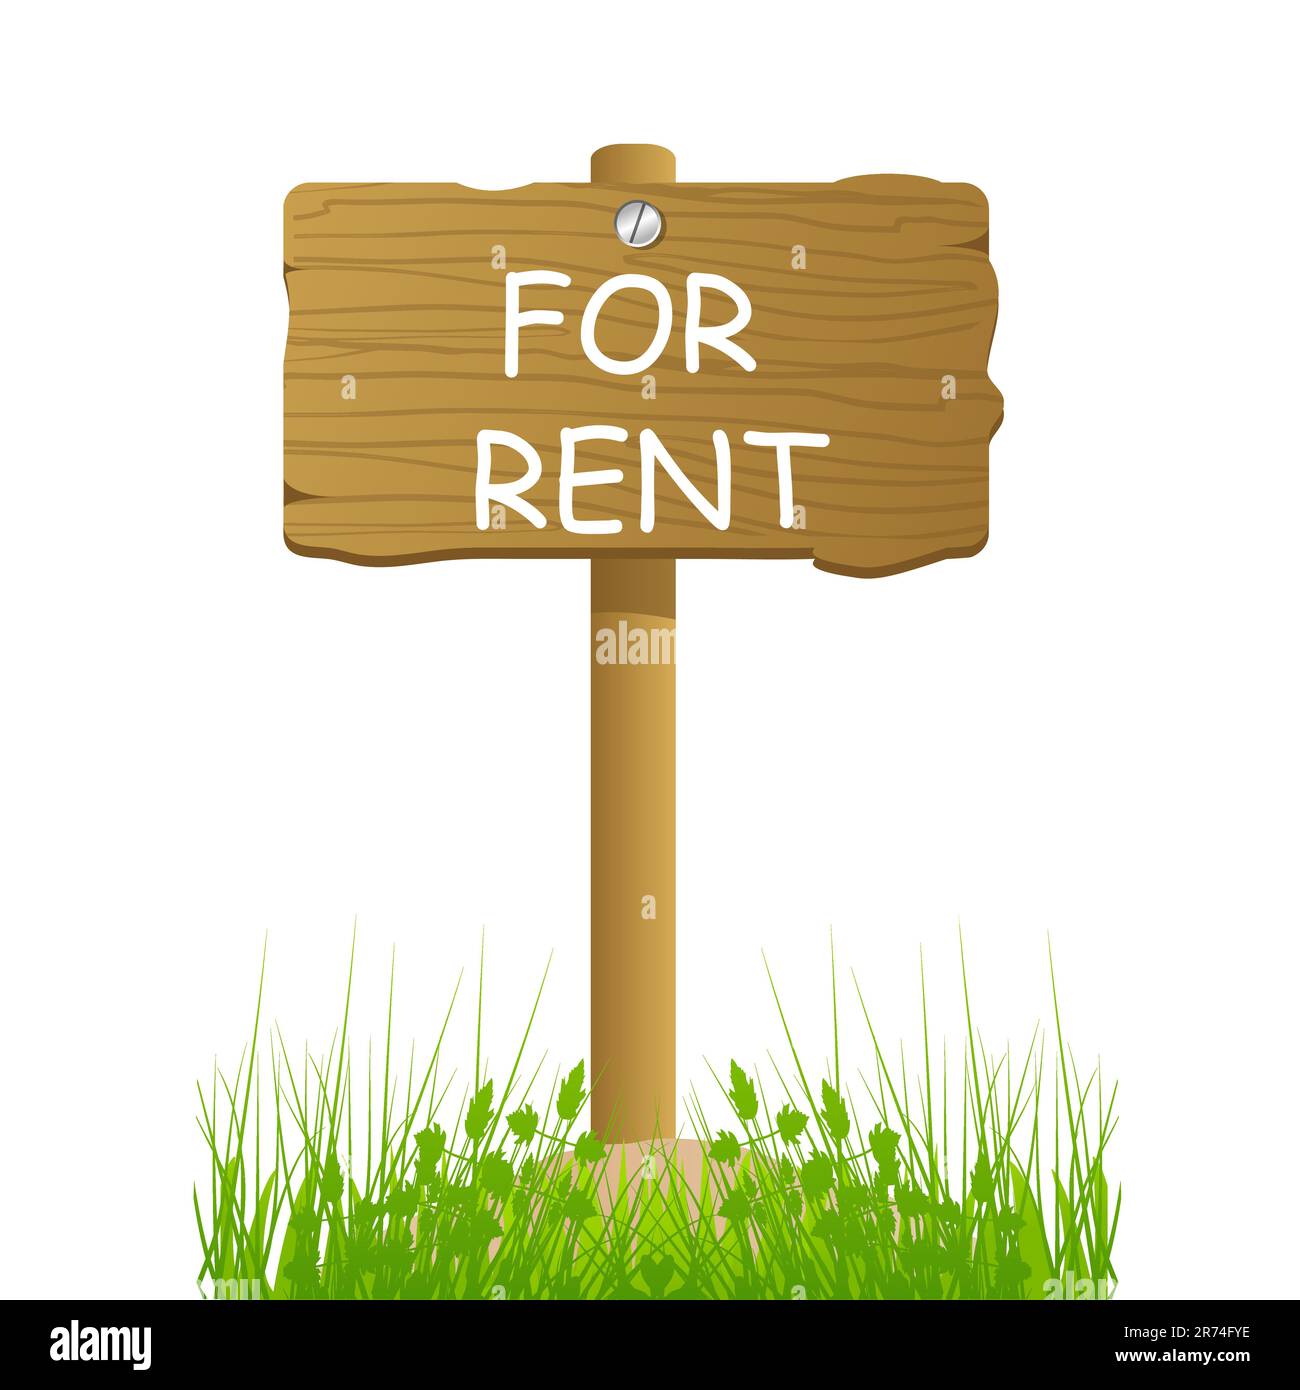 illustration of board for rent Stock Vector